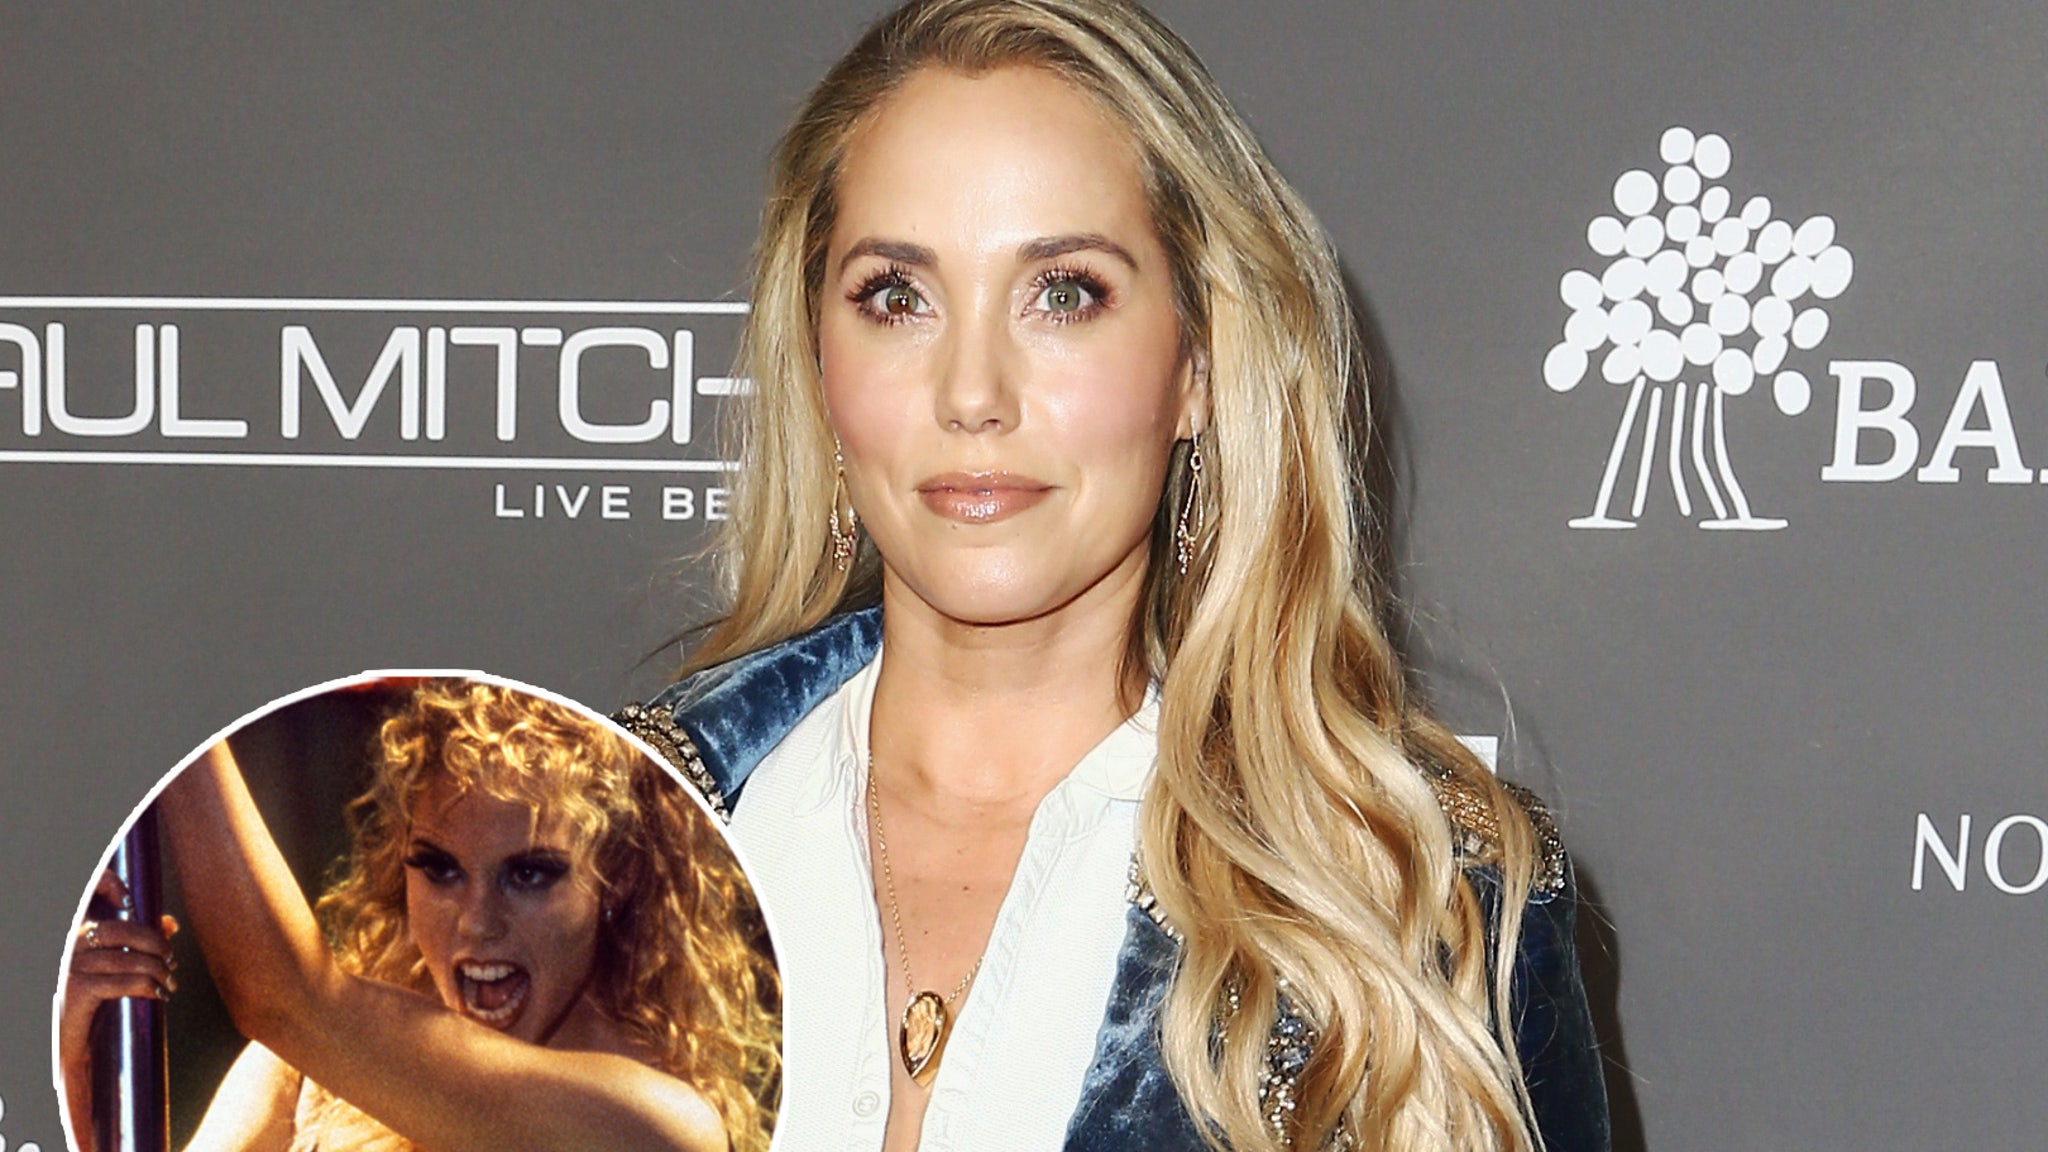 Elizabeth Berkley Talks Being a 'Pariah' in Hollywood After Showgirls |  Real Raw News today